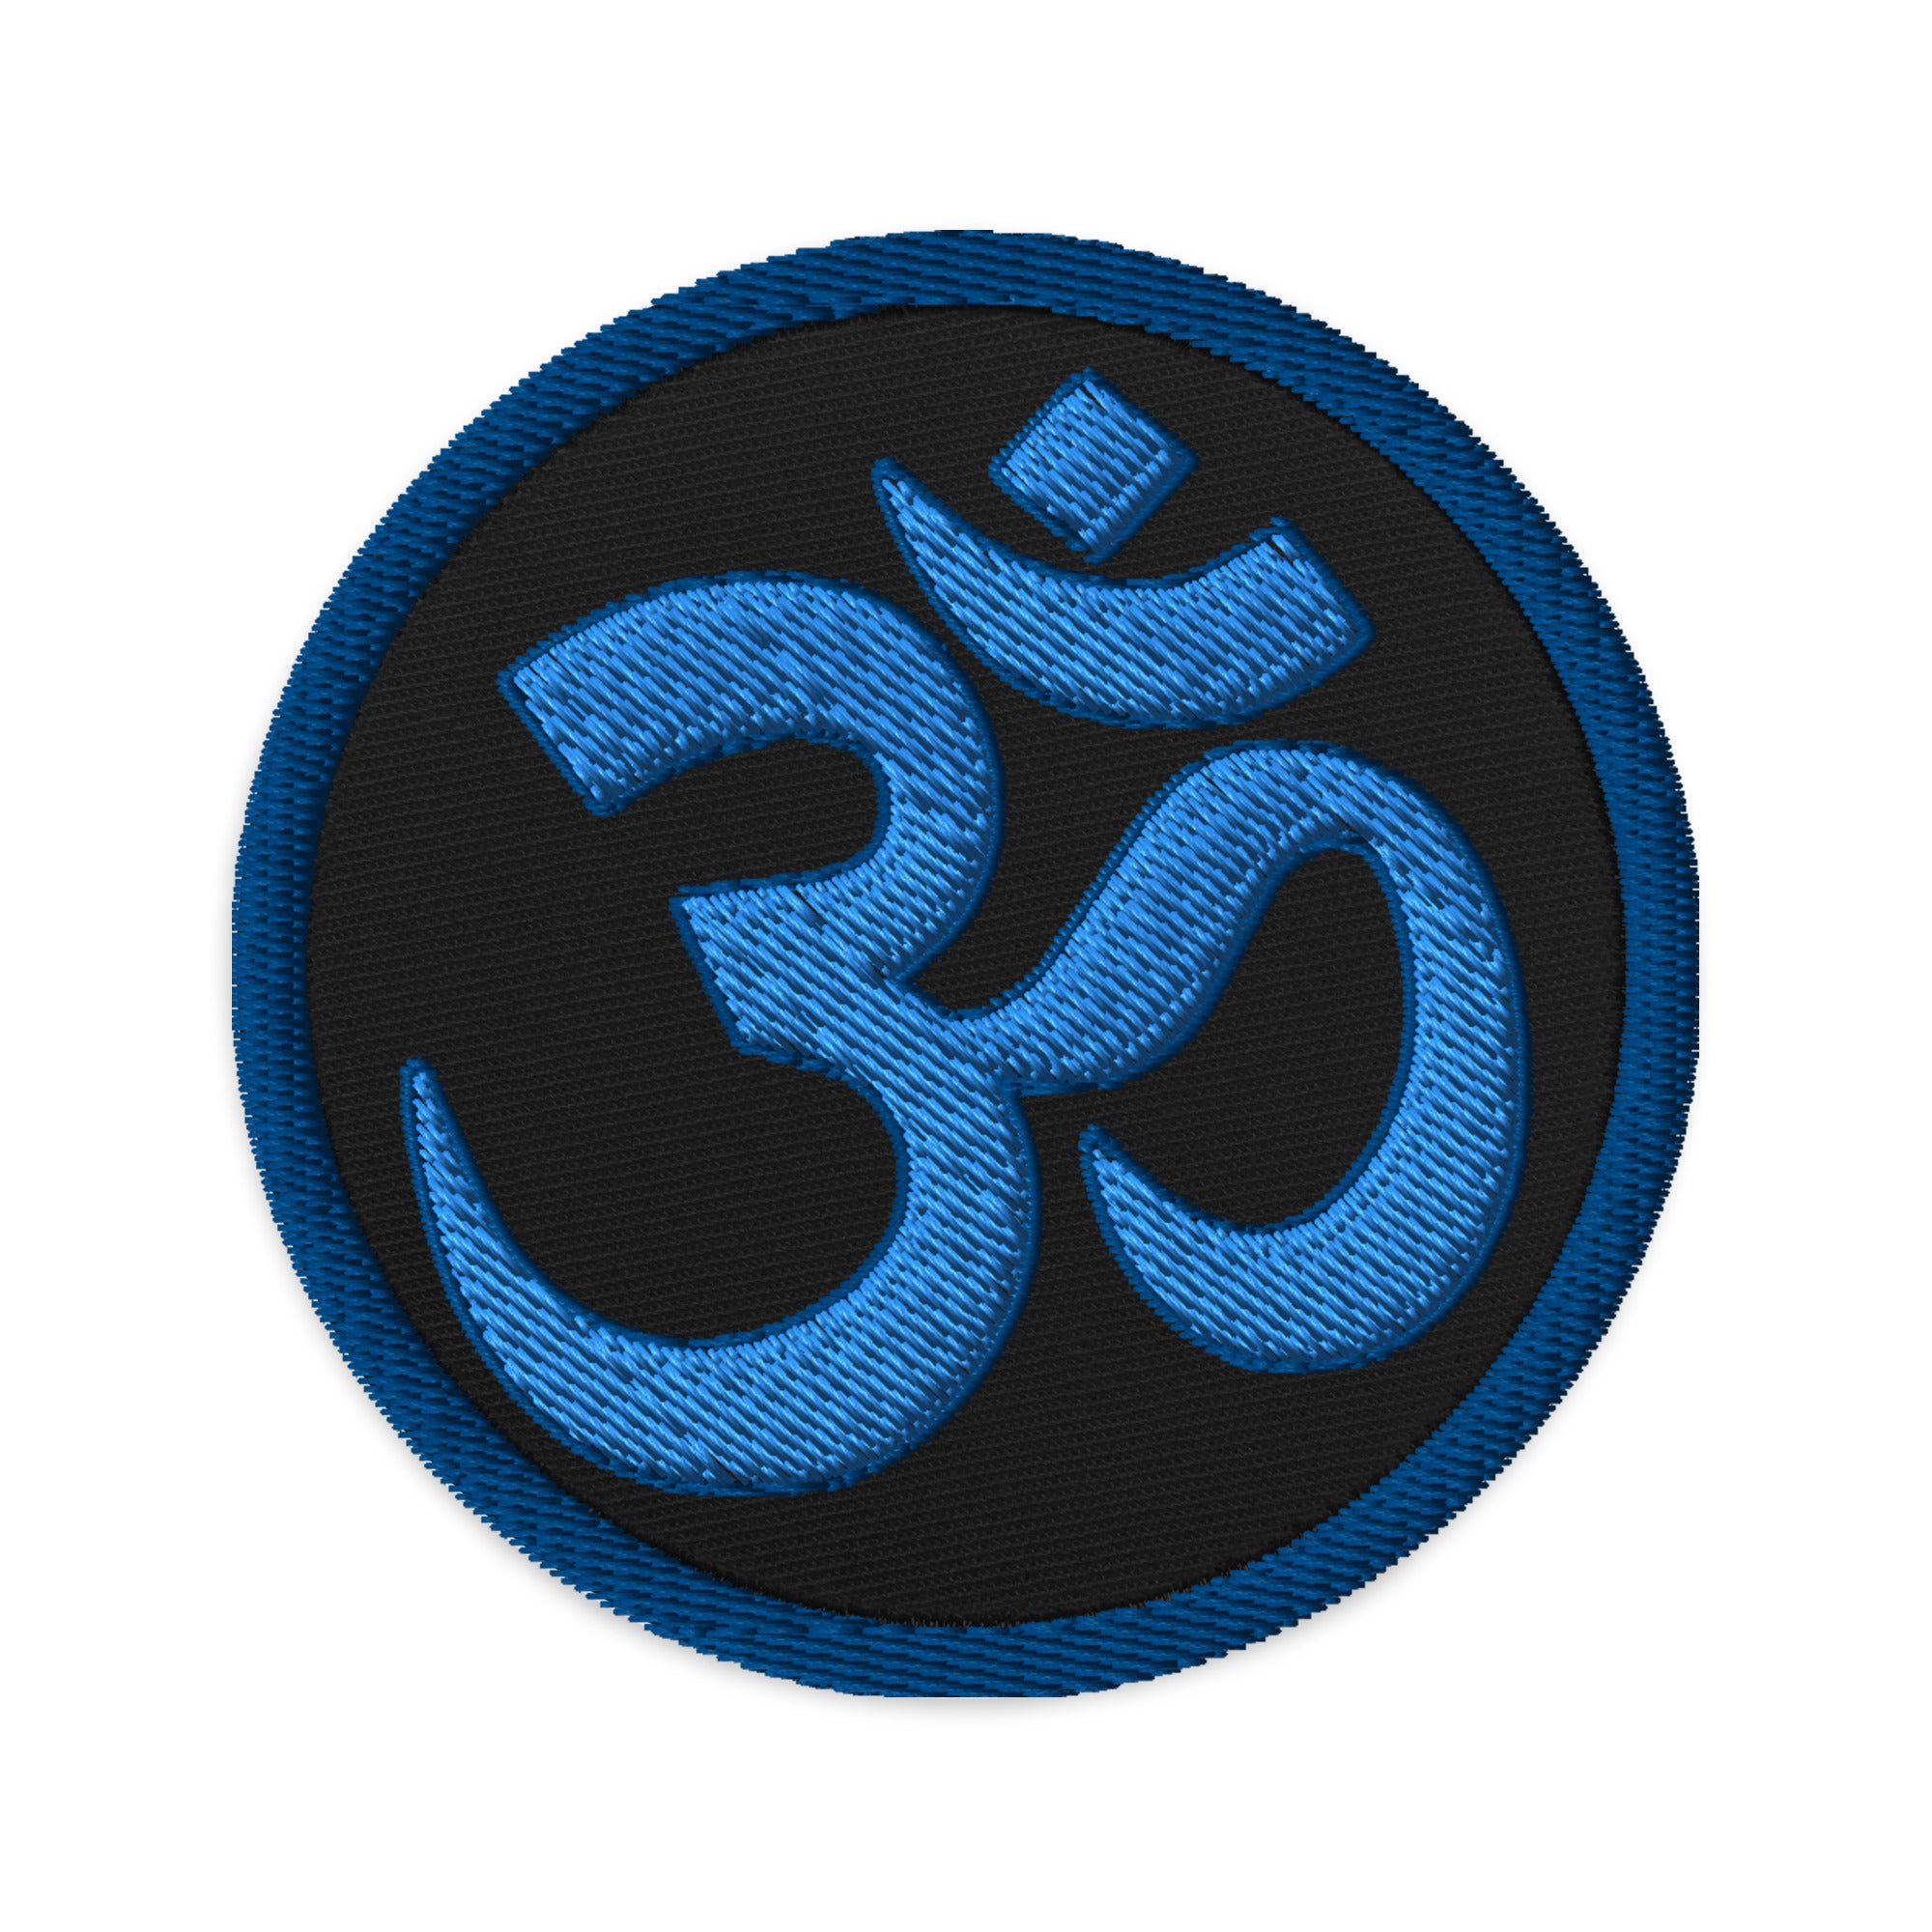 OM Sacred Spiritual Symbol Embroidered Patch Vibration of the Universe - Edge of Life Designs